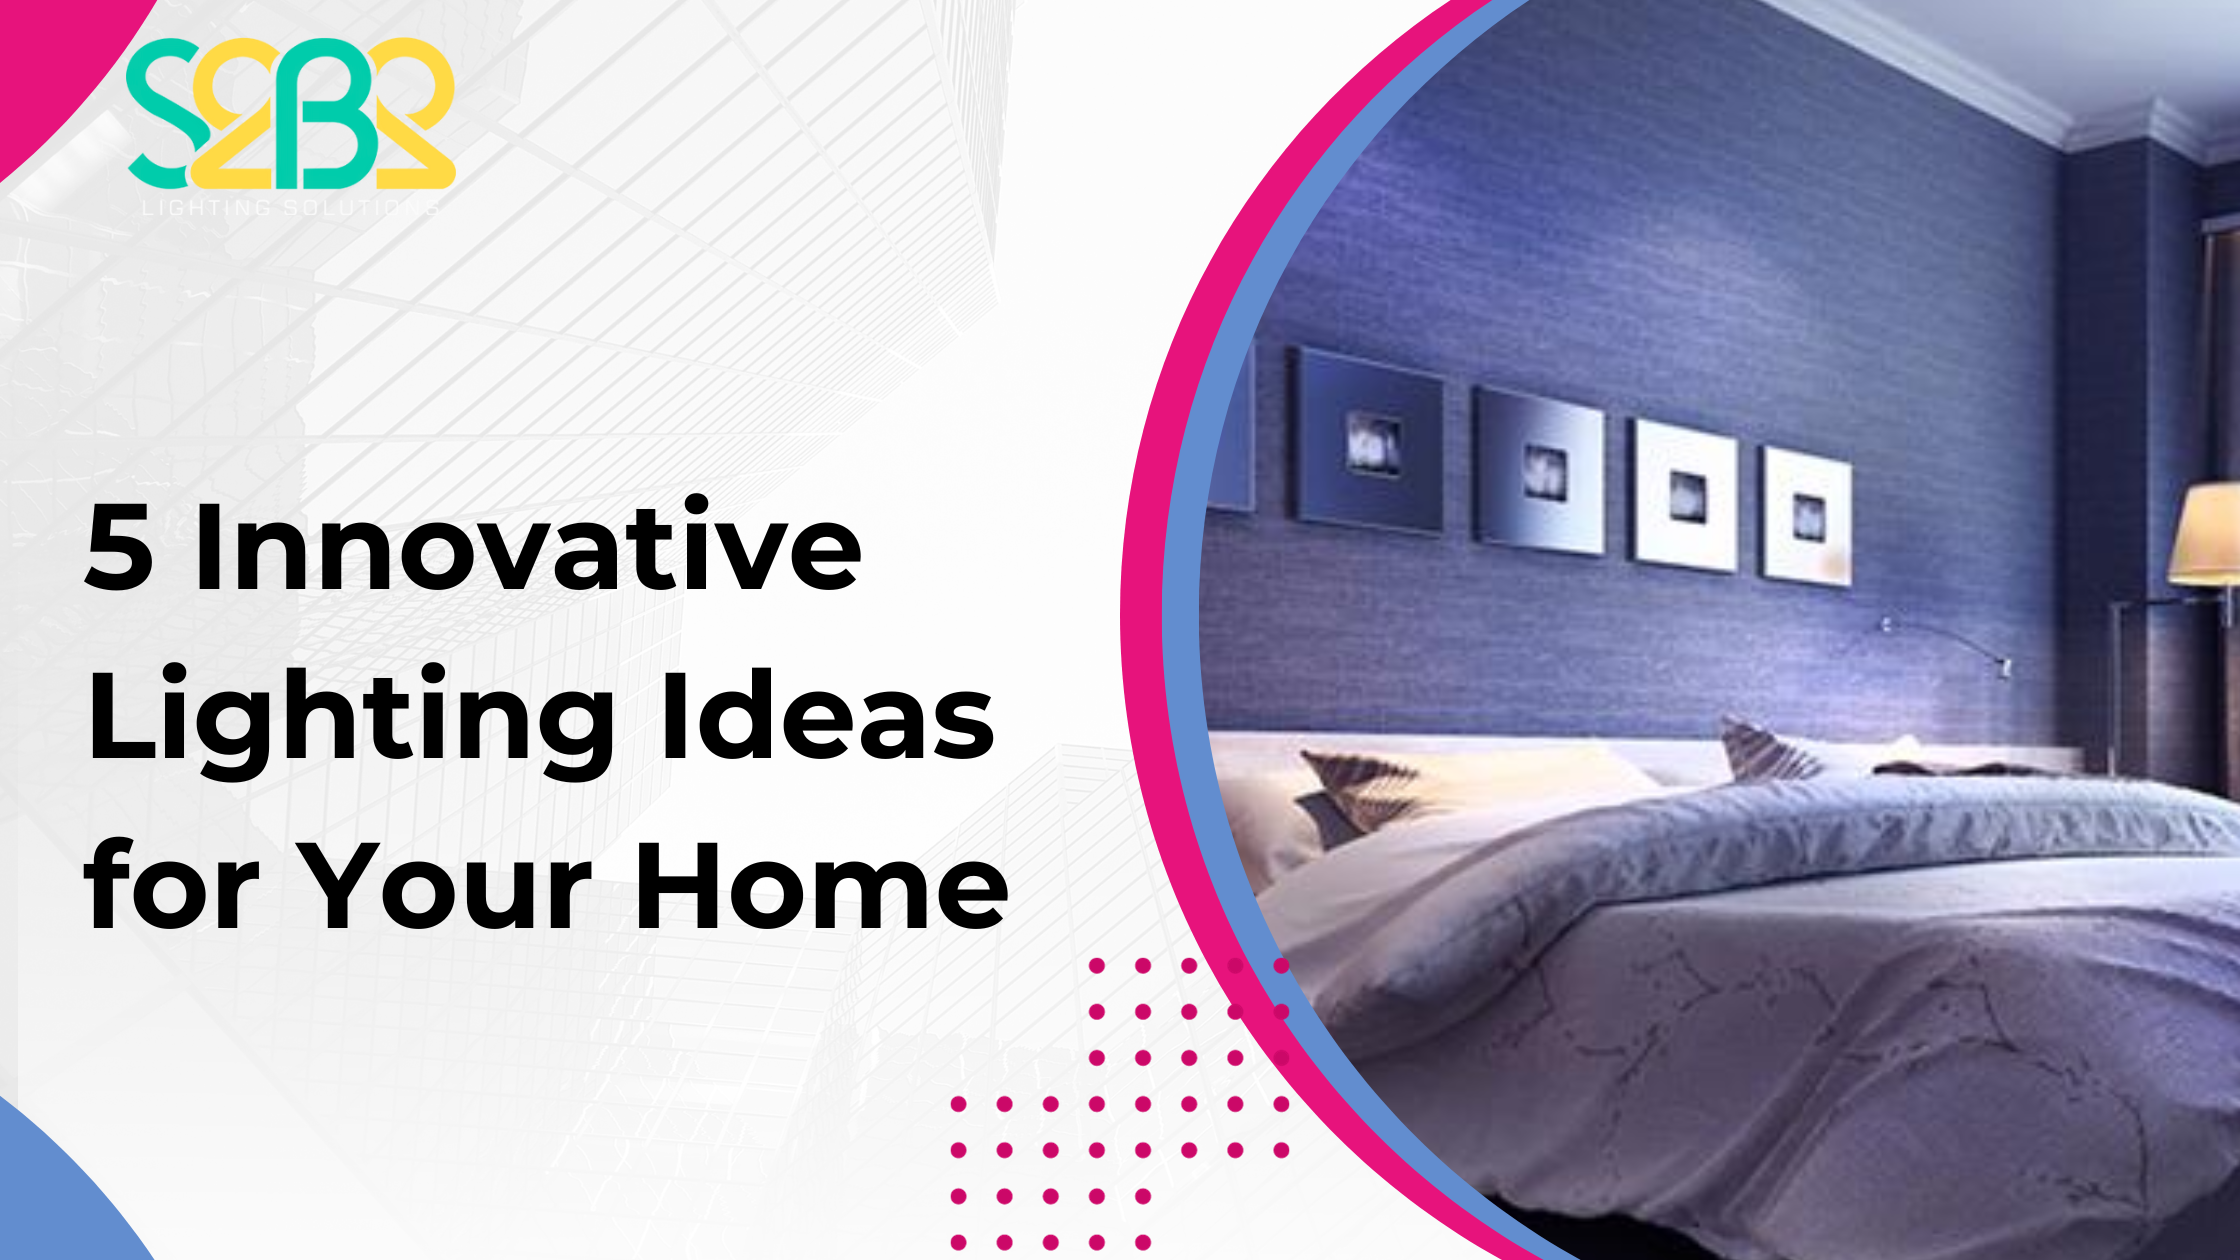 Brighten Your Home with 5 Innovative Lighting Ideas for Your Home